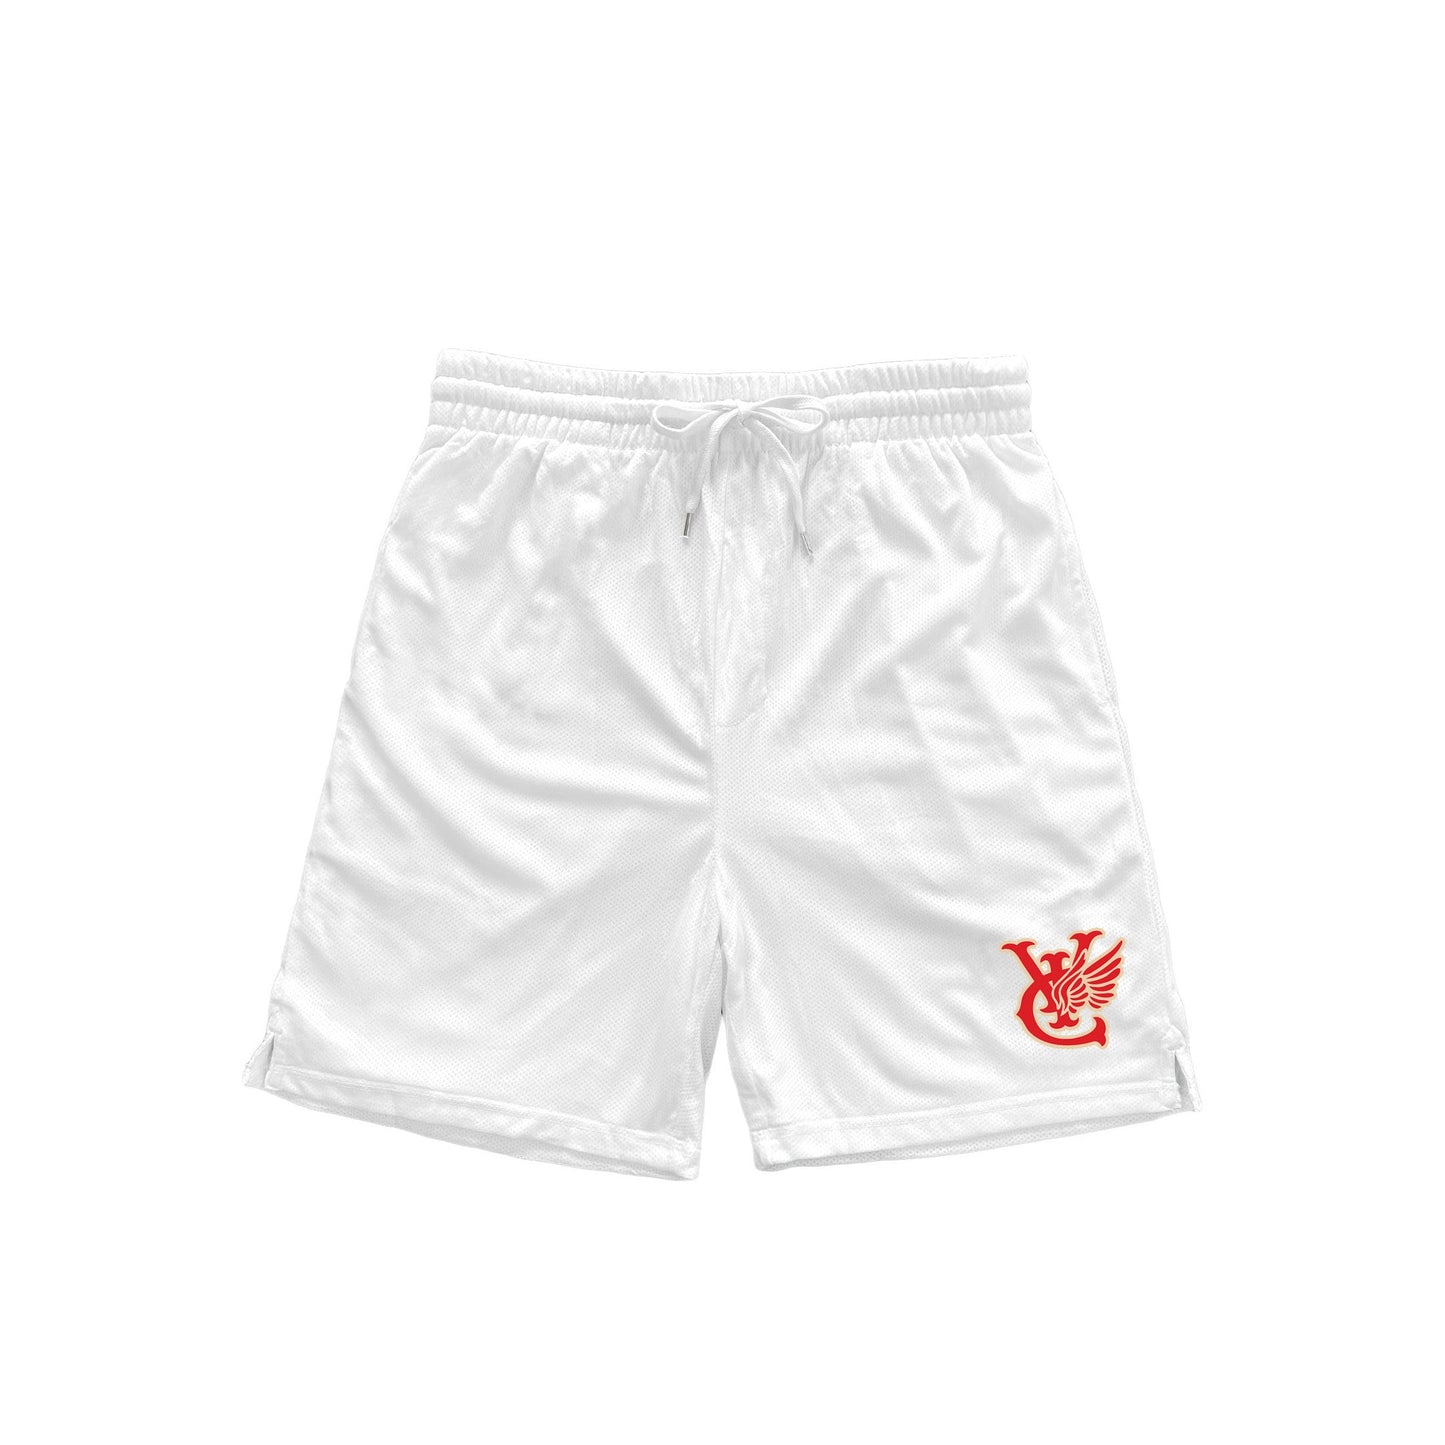 WING TEAM SHORTS - WHITE